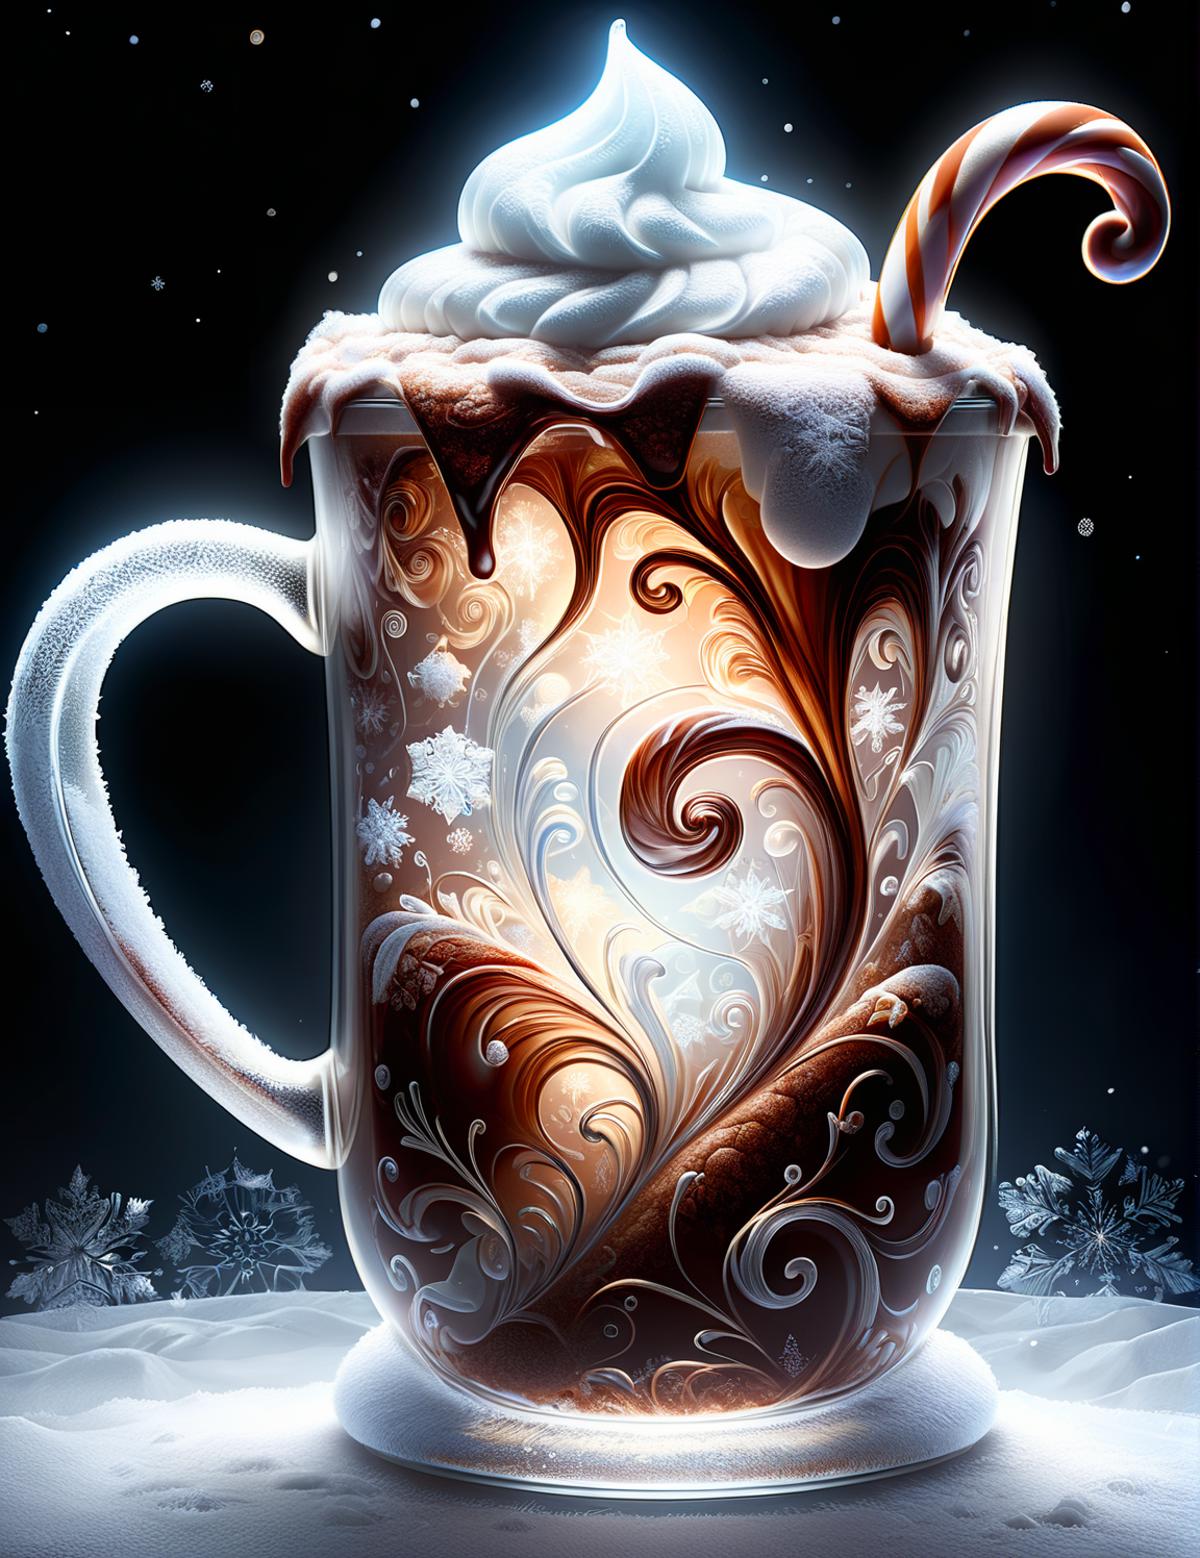 The image features a large, fancy coffee cup filled with a delicious hot chocolate drink. The cup is adorned with a whimsical design, including a candy cane and a snowflake, giving it a festive and holiday-themed appearance. The cup is placed on a table, ready to be enjoyed by someone who appreciates a warm and visually appealing beverage.